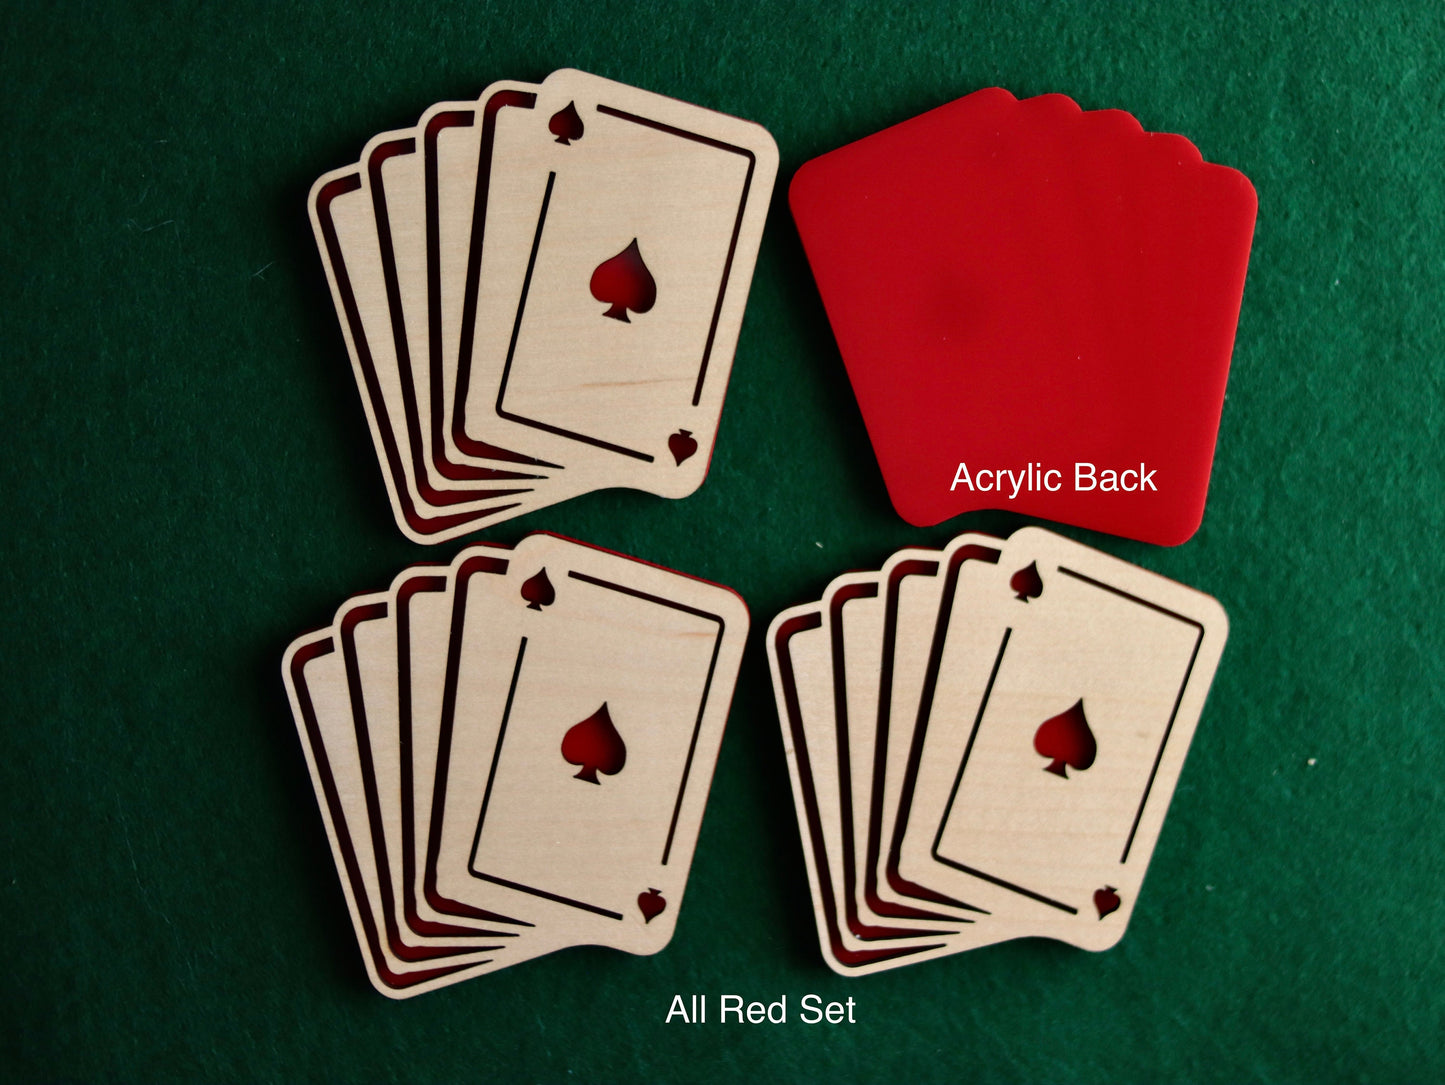 Playing Card Coaster Set, Card Players Gift, Poker Players, Game Room Decor, Man Cave , Hostess Gift, Casino, Choice of Black, Red, or Both